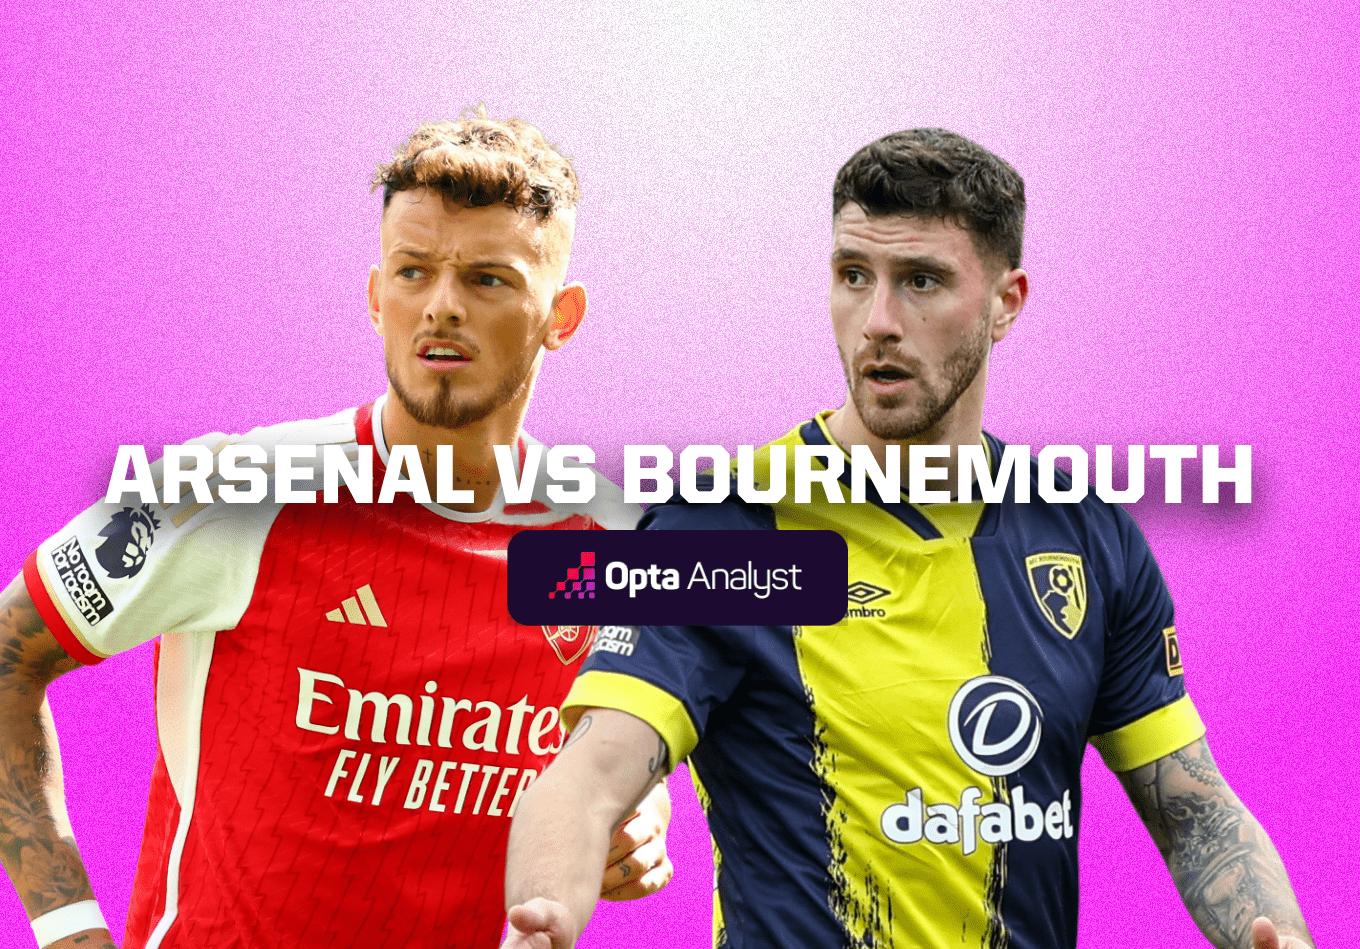 Arsenal vs Bournemouth Prediction and Preview